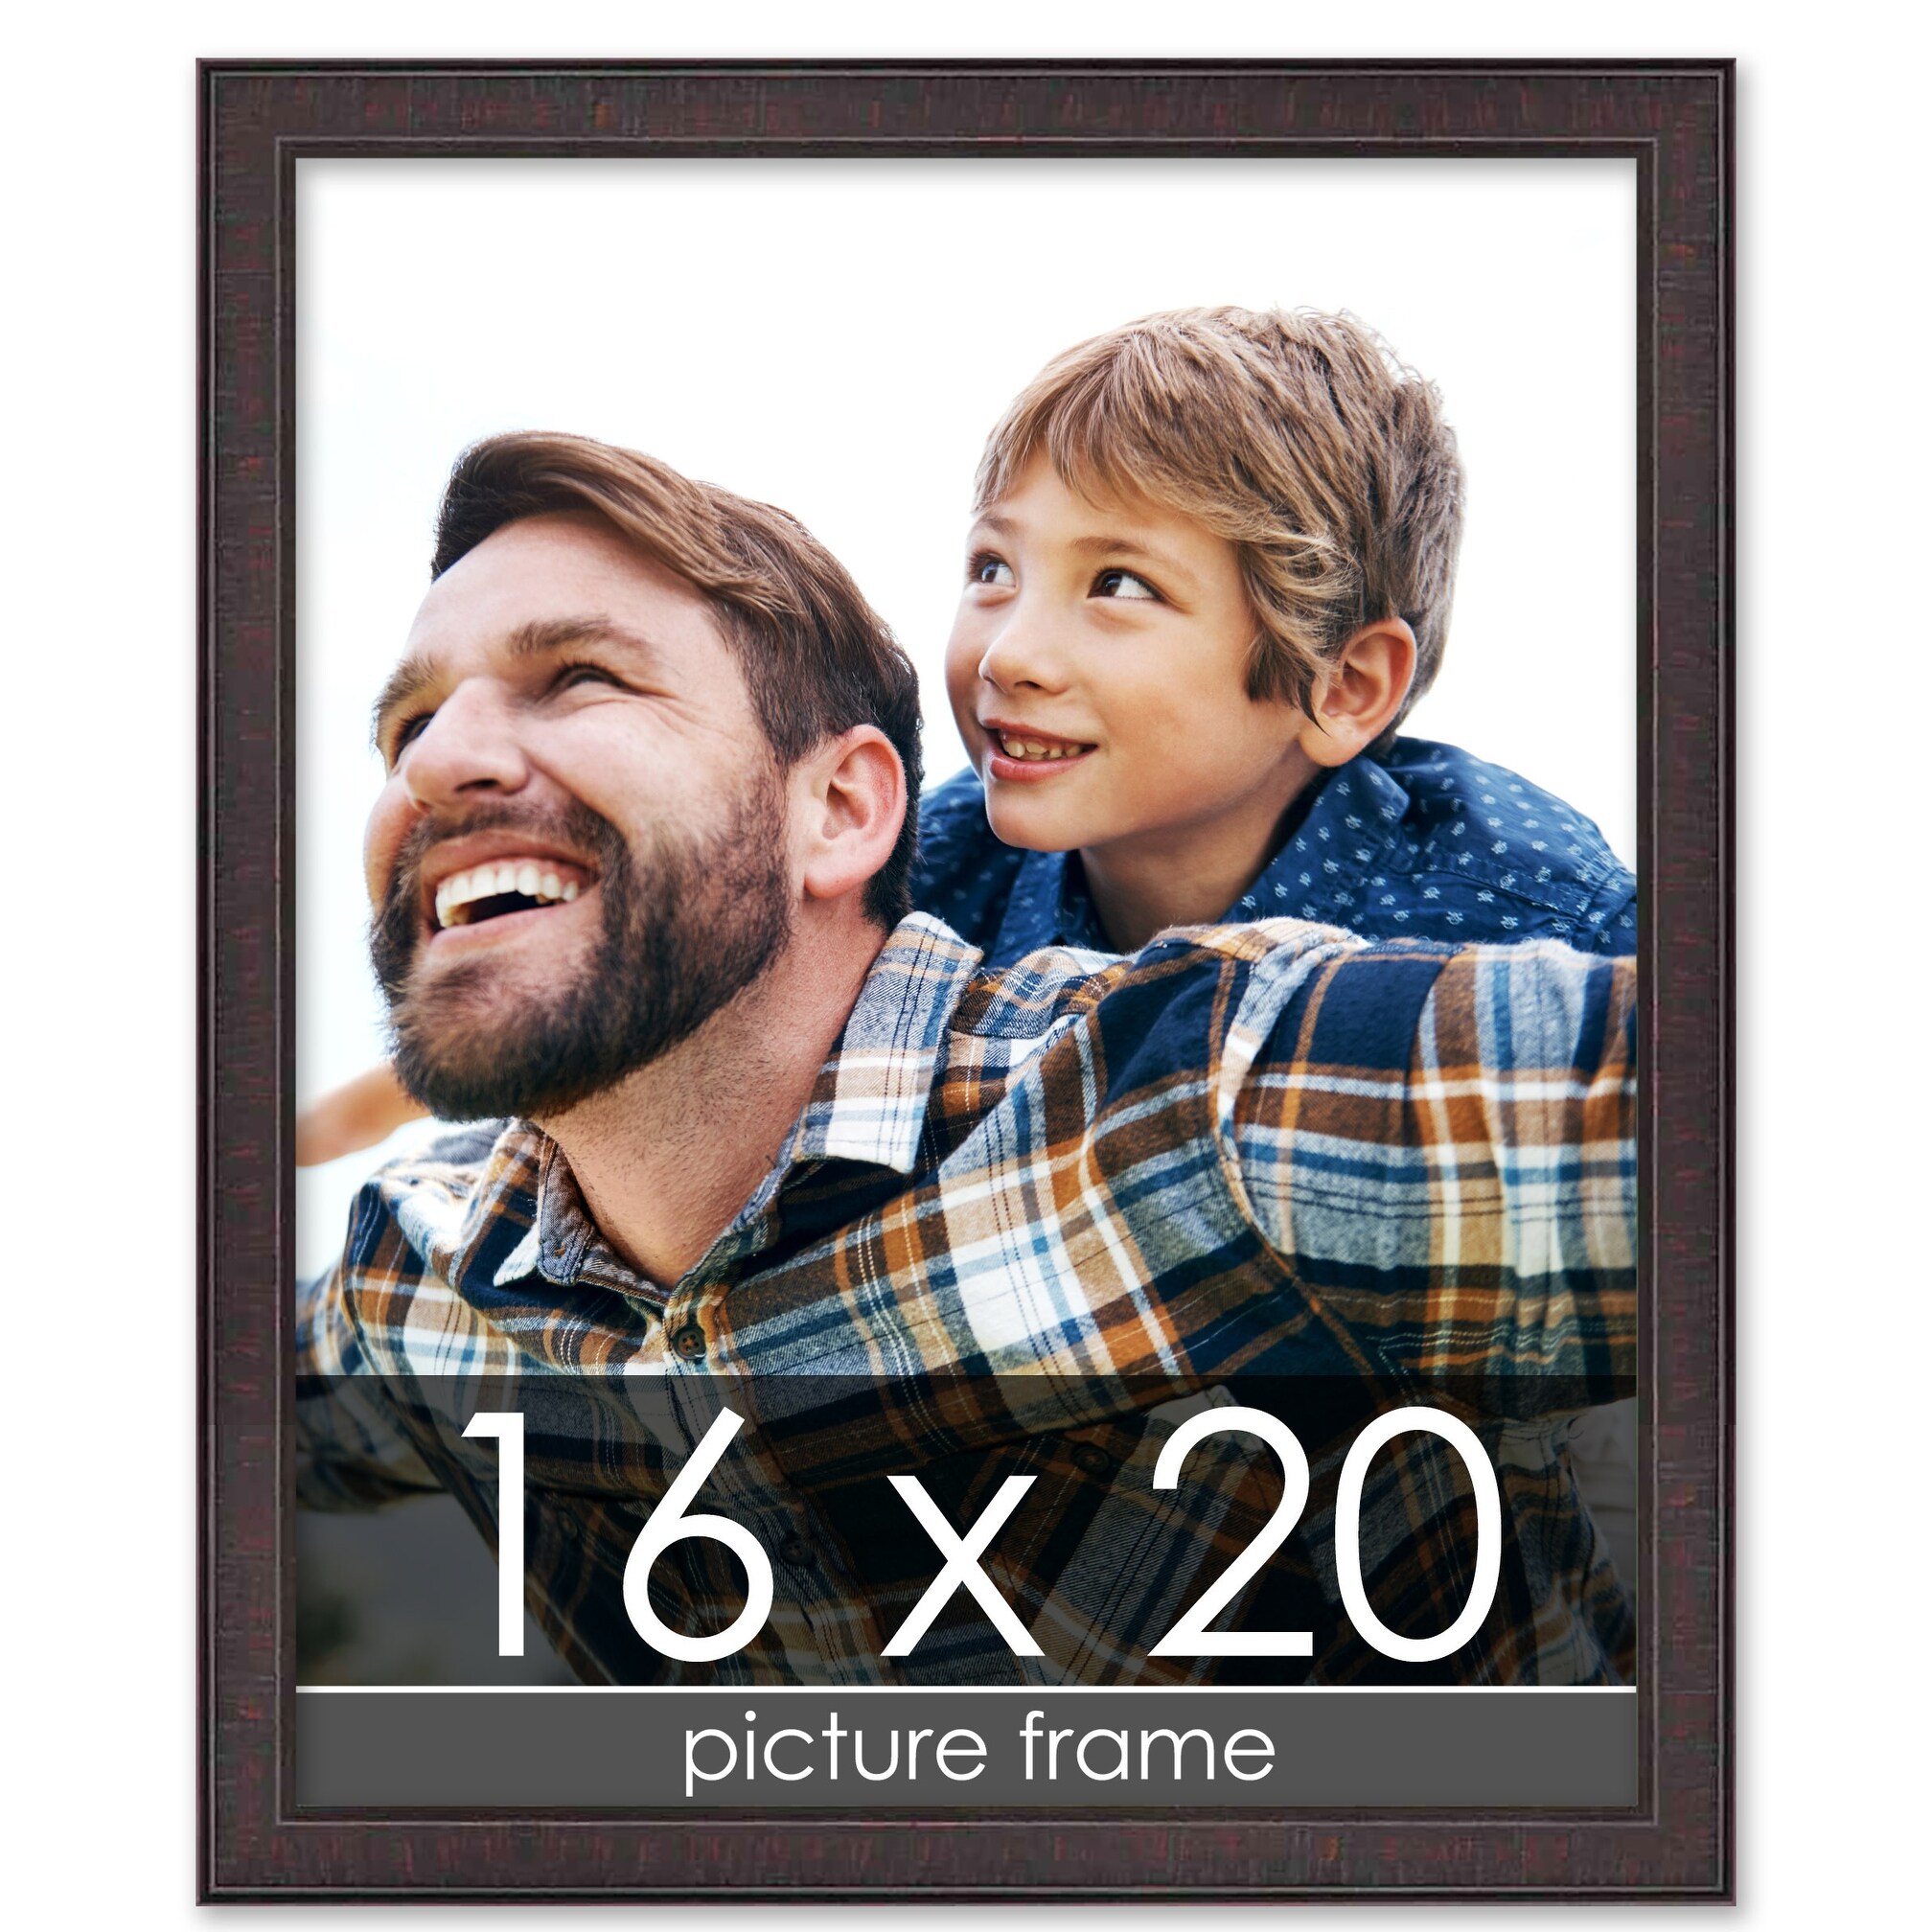 Poster Palooza 16x24 Frame Gold Bronze Wood Picture Frame - UV Acrylic,  Foam Board Backing, & Hanging Hardware Included!